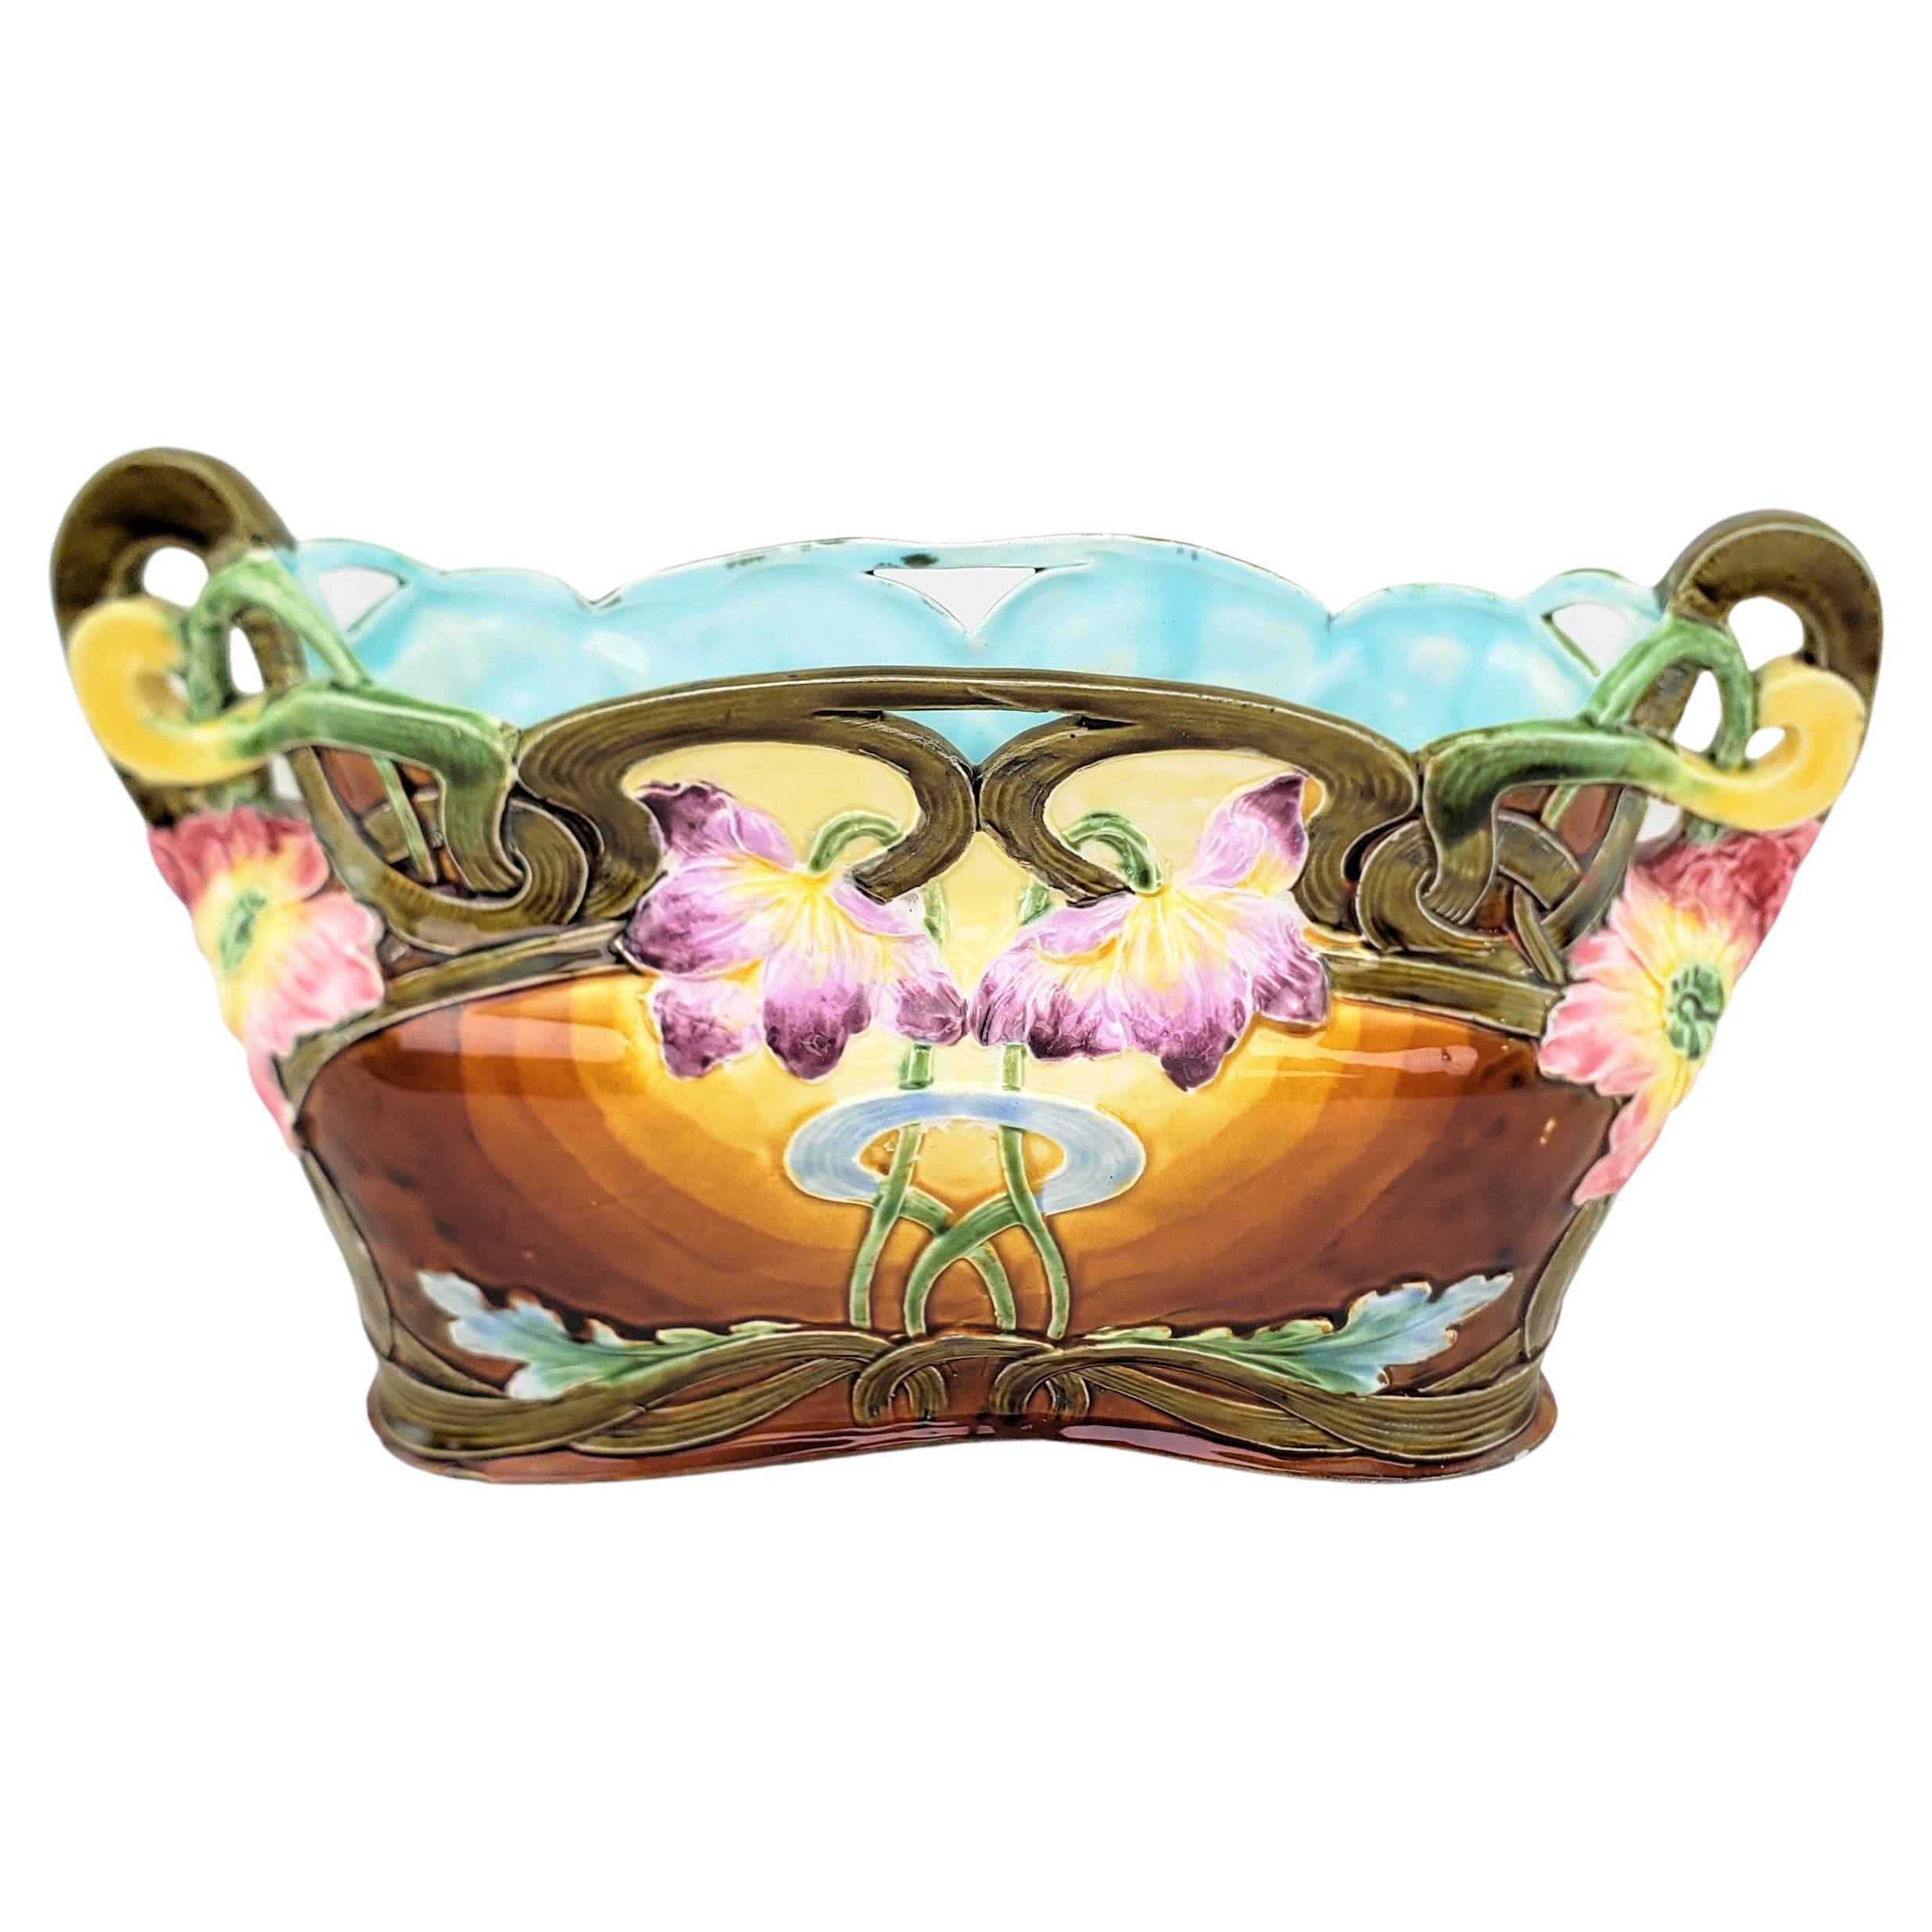 Antique English Majolica Planter or Jardiniere with Floral Decoration For Sale